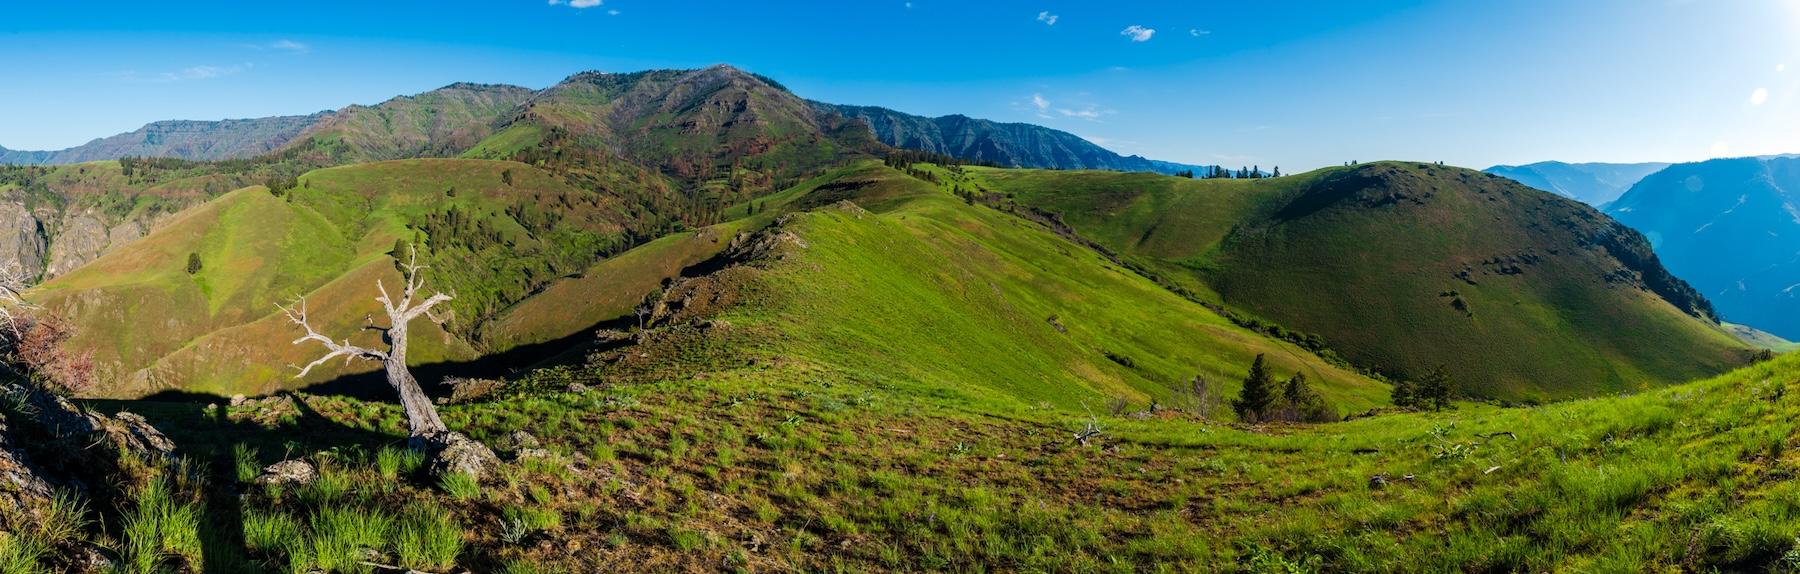 Panorama of Hat Point and the Hat Creek drainage in Hells Canyon